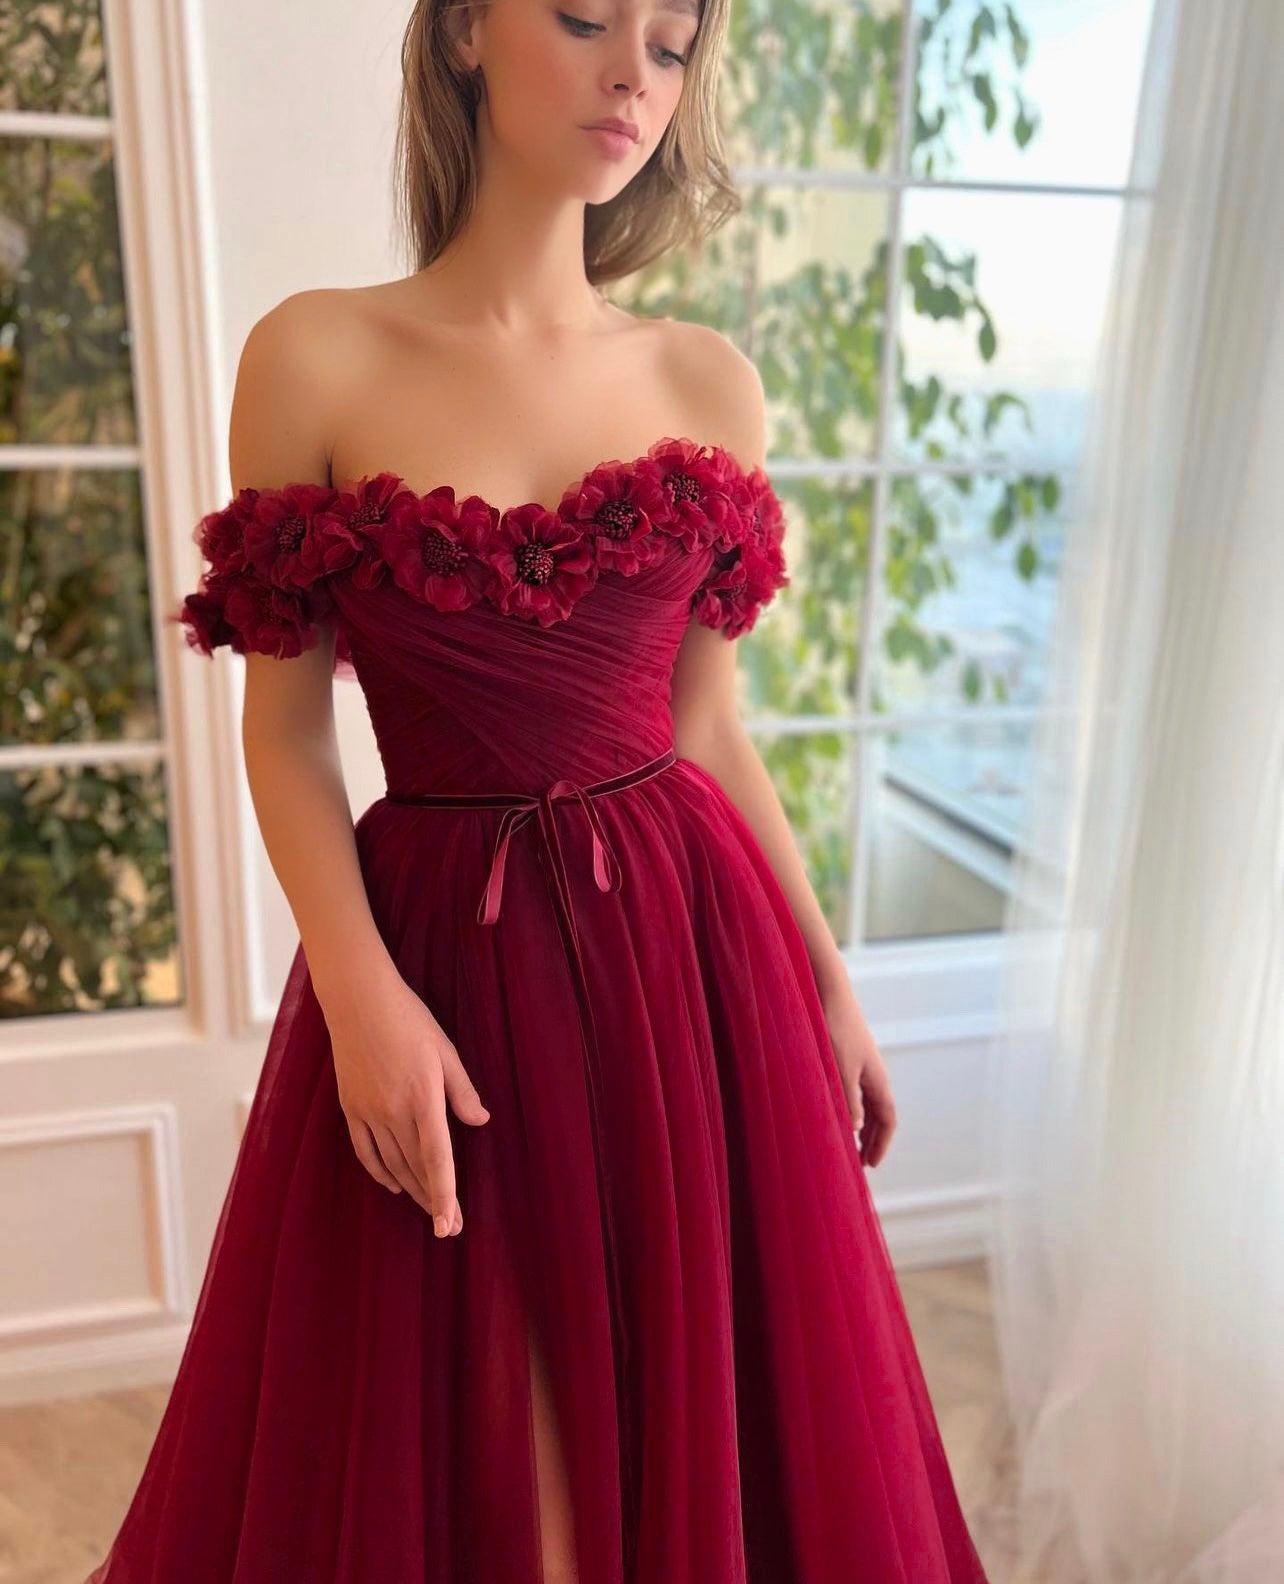 Red A-Line dress with embroidery, flowers and off the shoulder sleeves